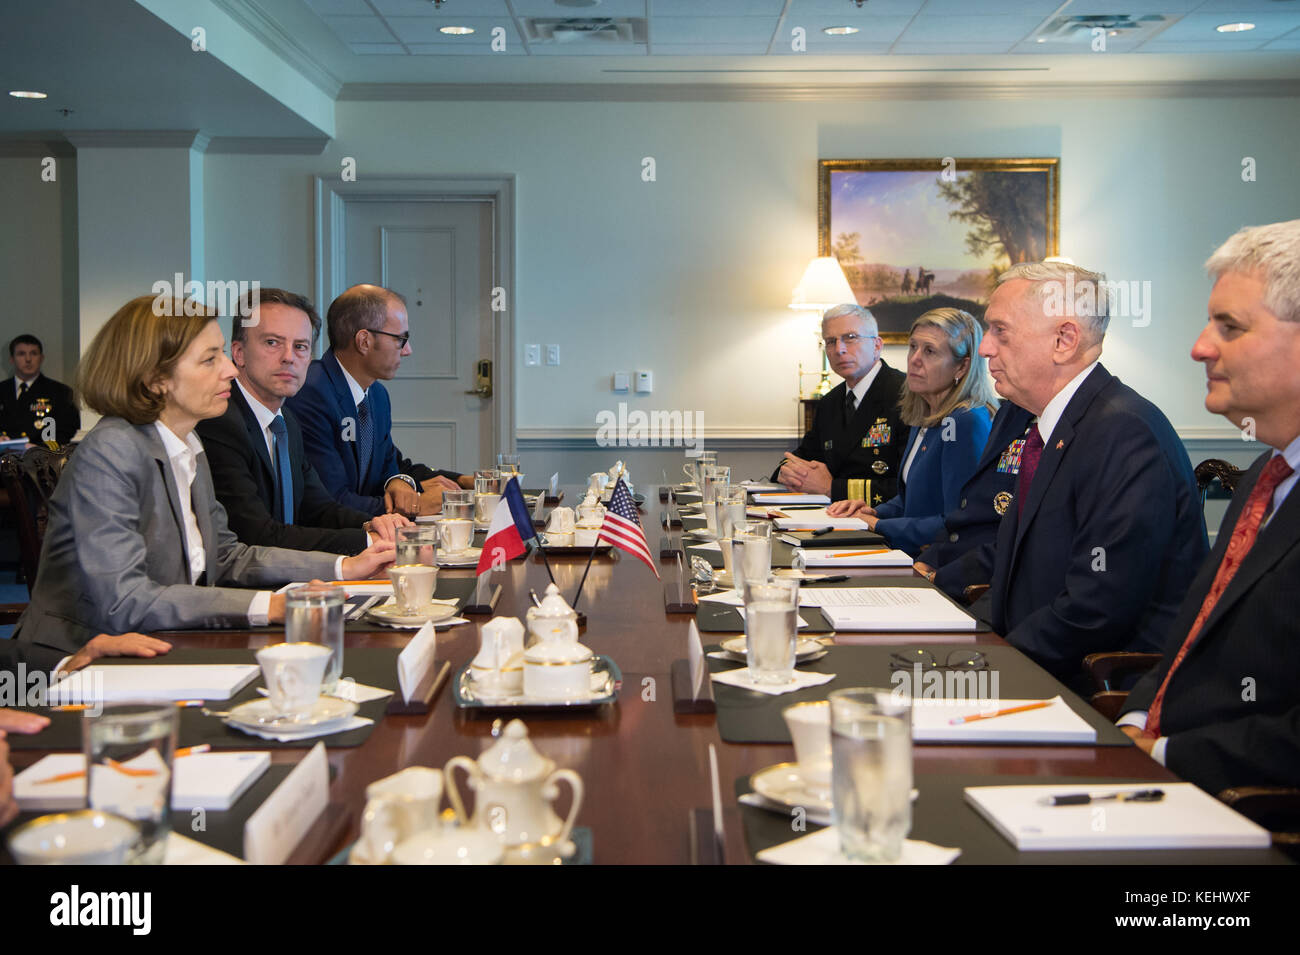 Secretary of Defense Jim Mattis meets with Florence Parly, France’s minister of defense, at the Pentagon in Washington, D.C., Oct. 20, 2017. Stock Photo